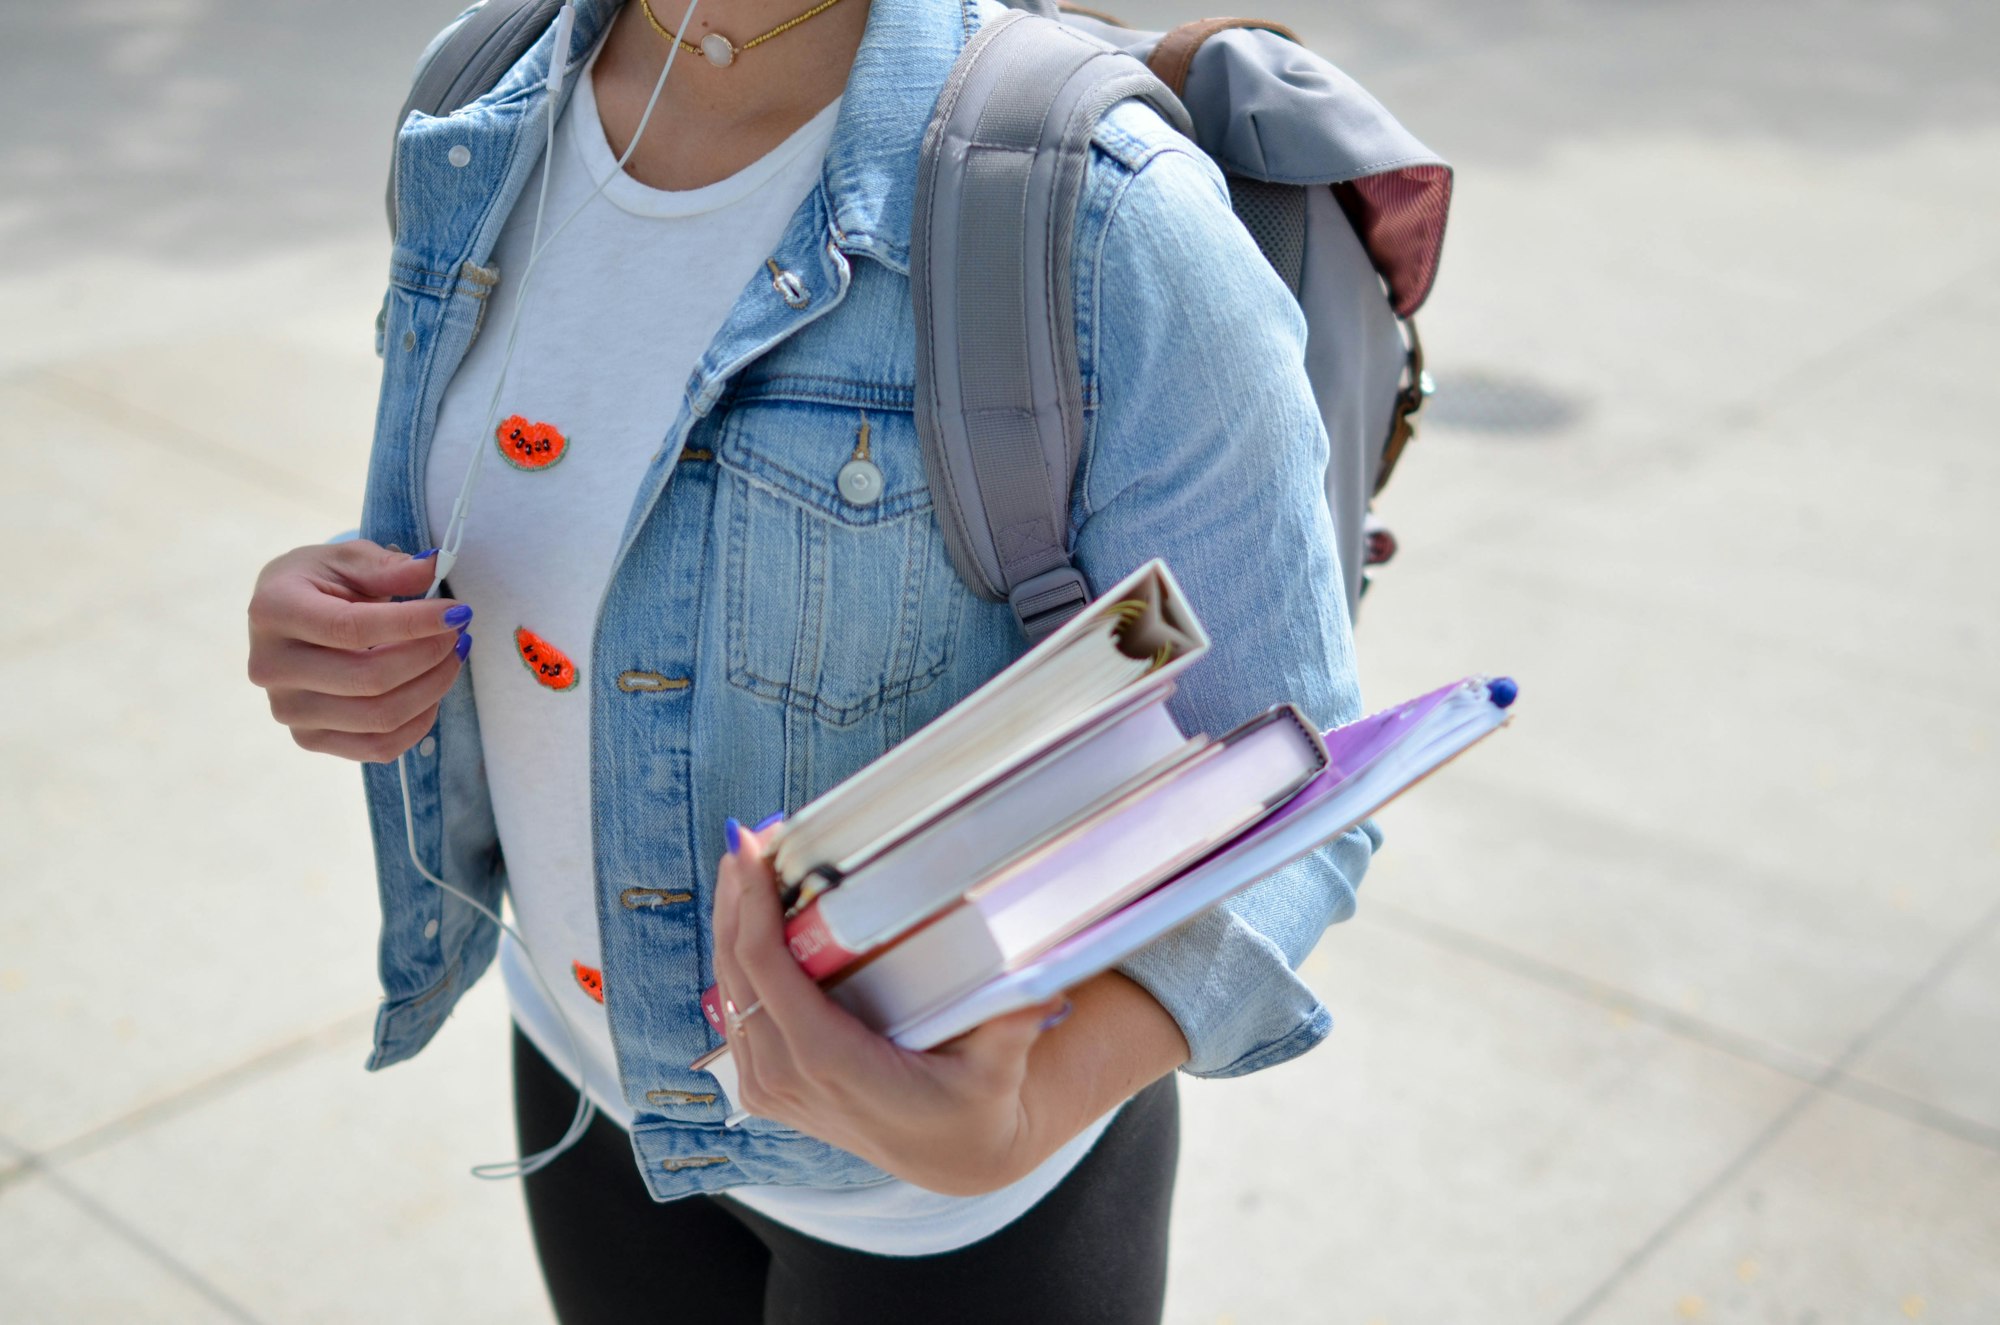 A student walks with her books while listening to music.